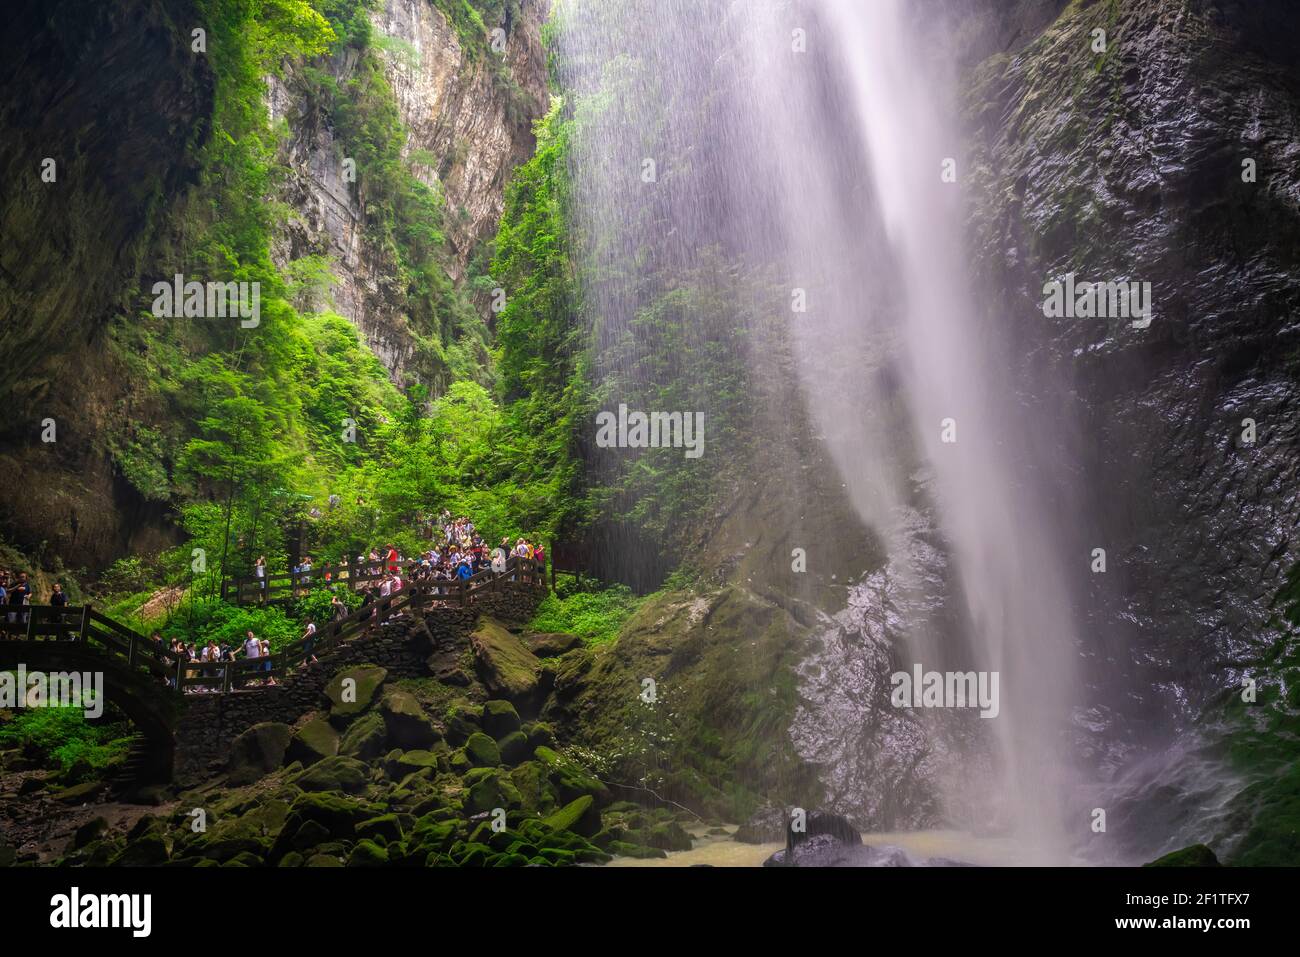 Crowds under waterfall in Wulong National Park Stock Photo